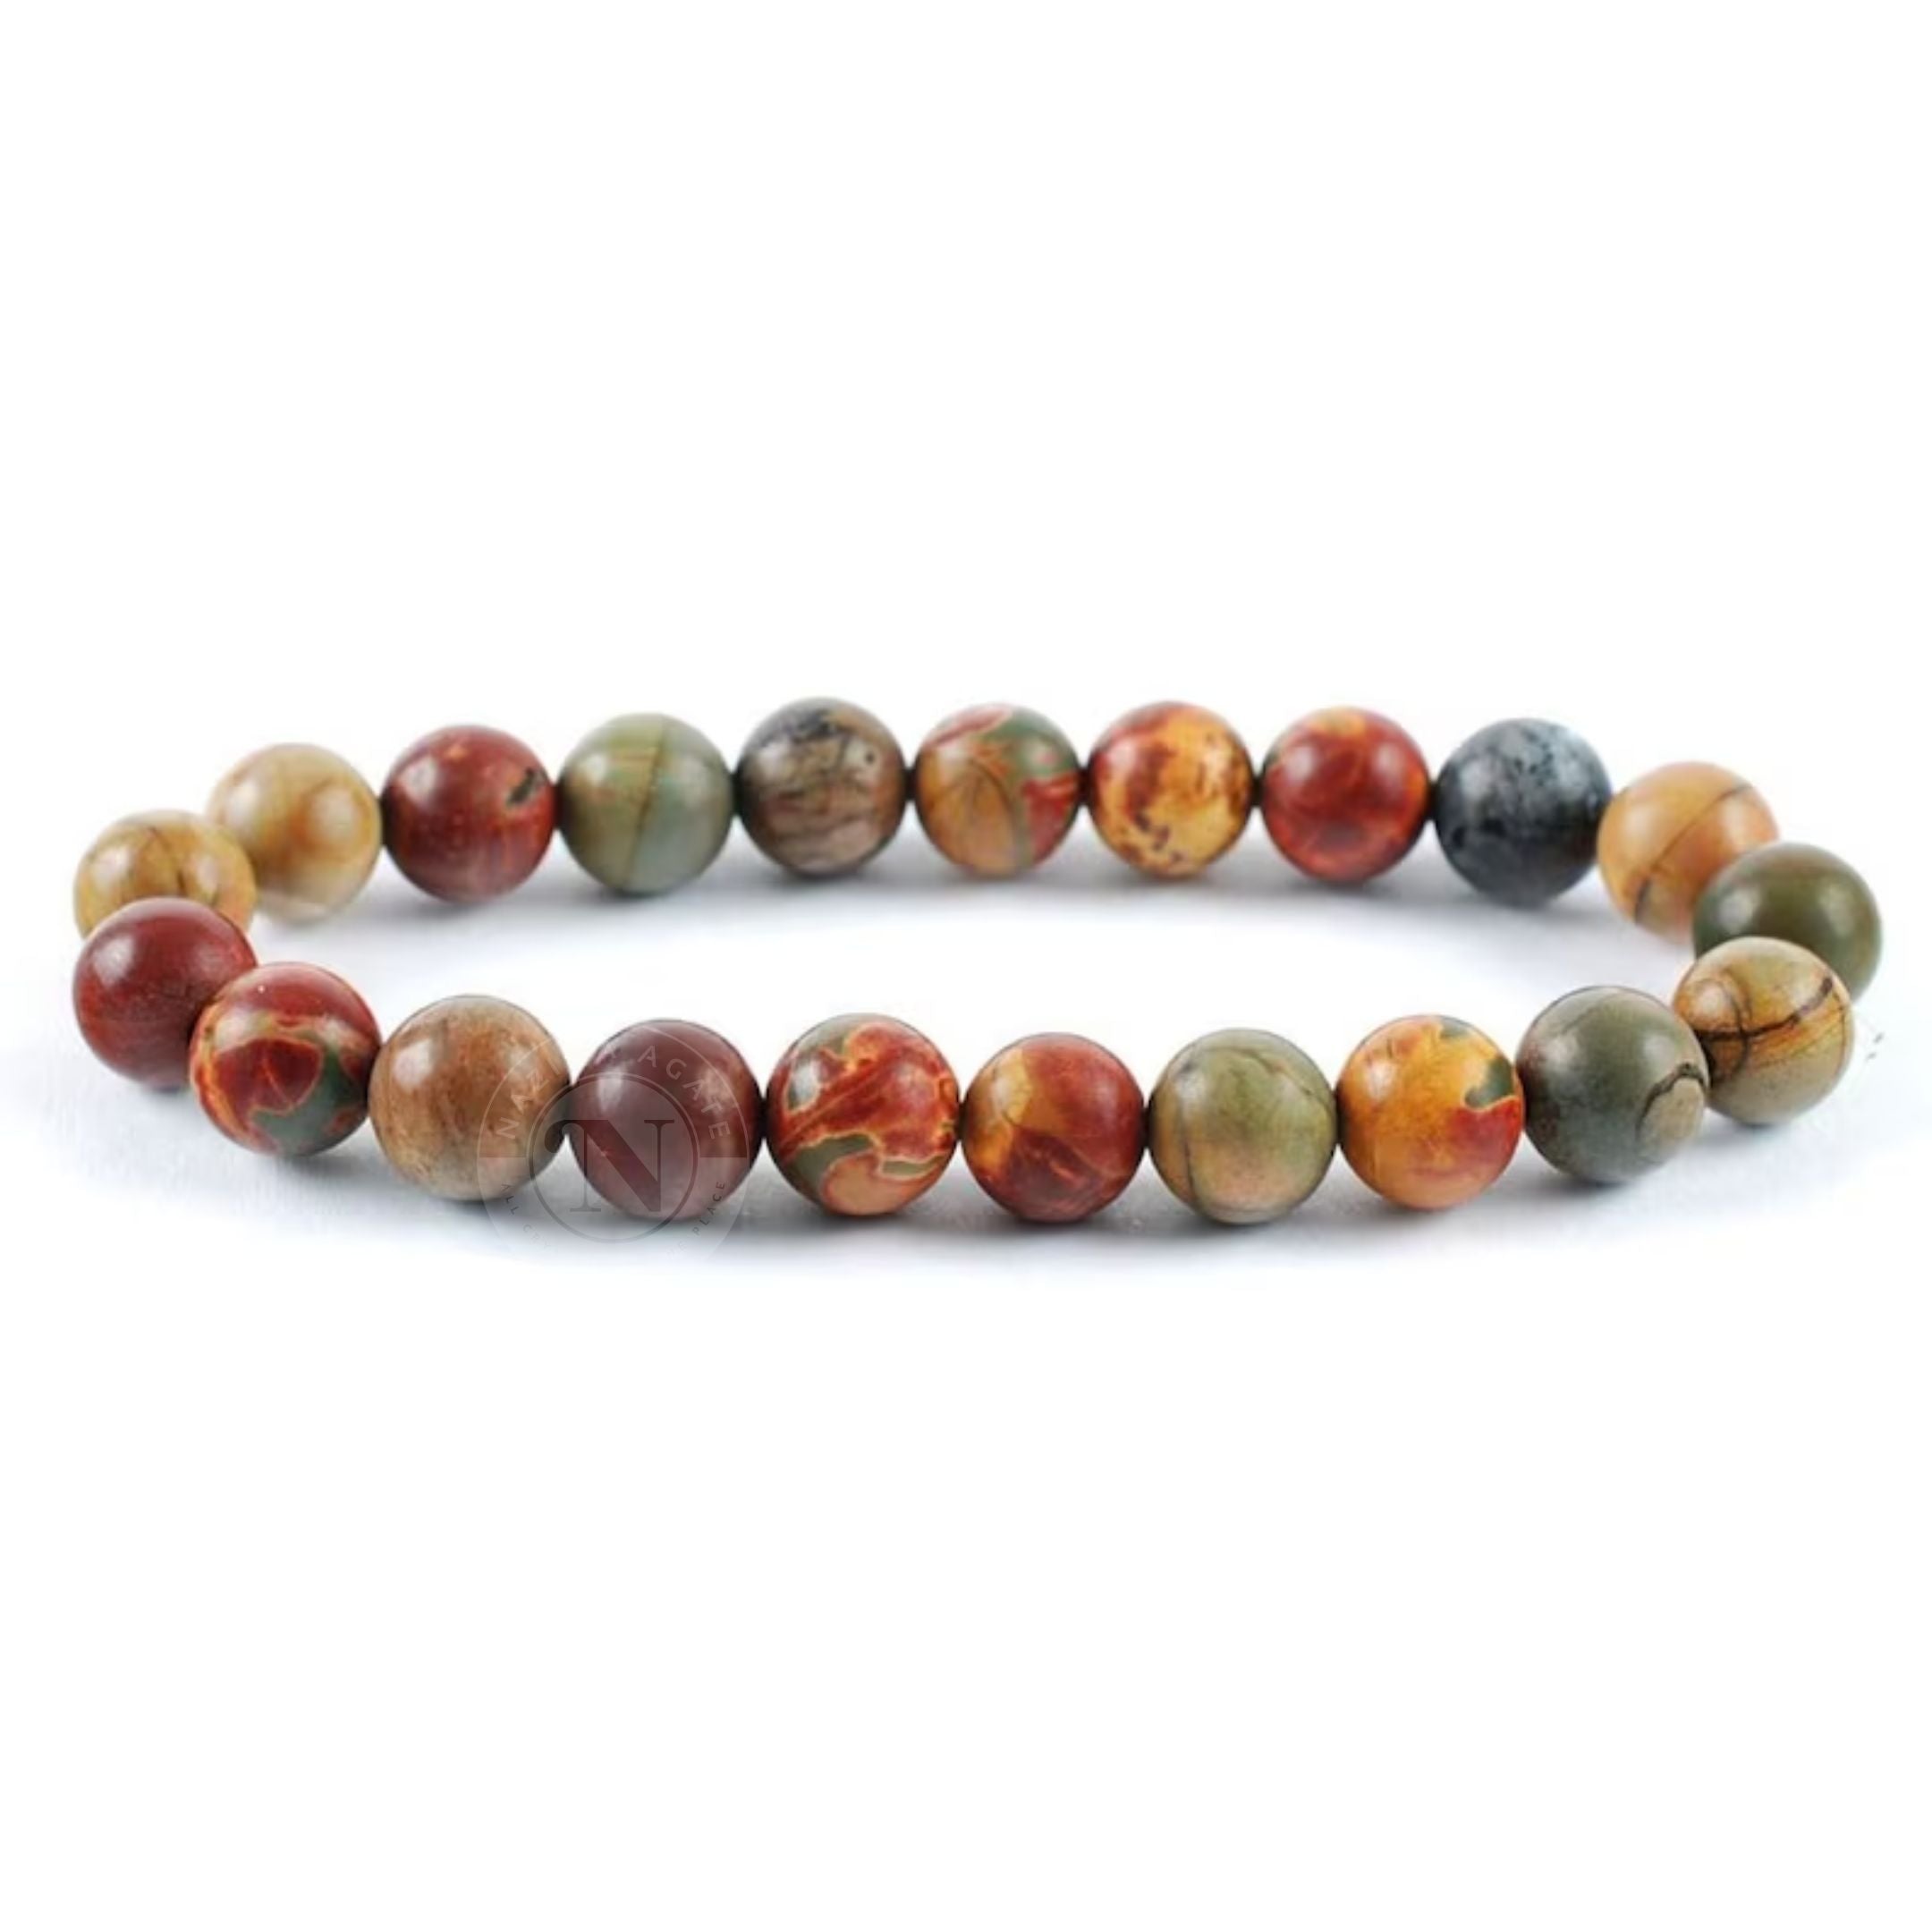 Tiger Eye Picasso Jasper Epidote Unakite 8 mm Faceted Bead Bracelet Combo  Pack of 4 pc